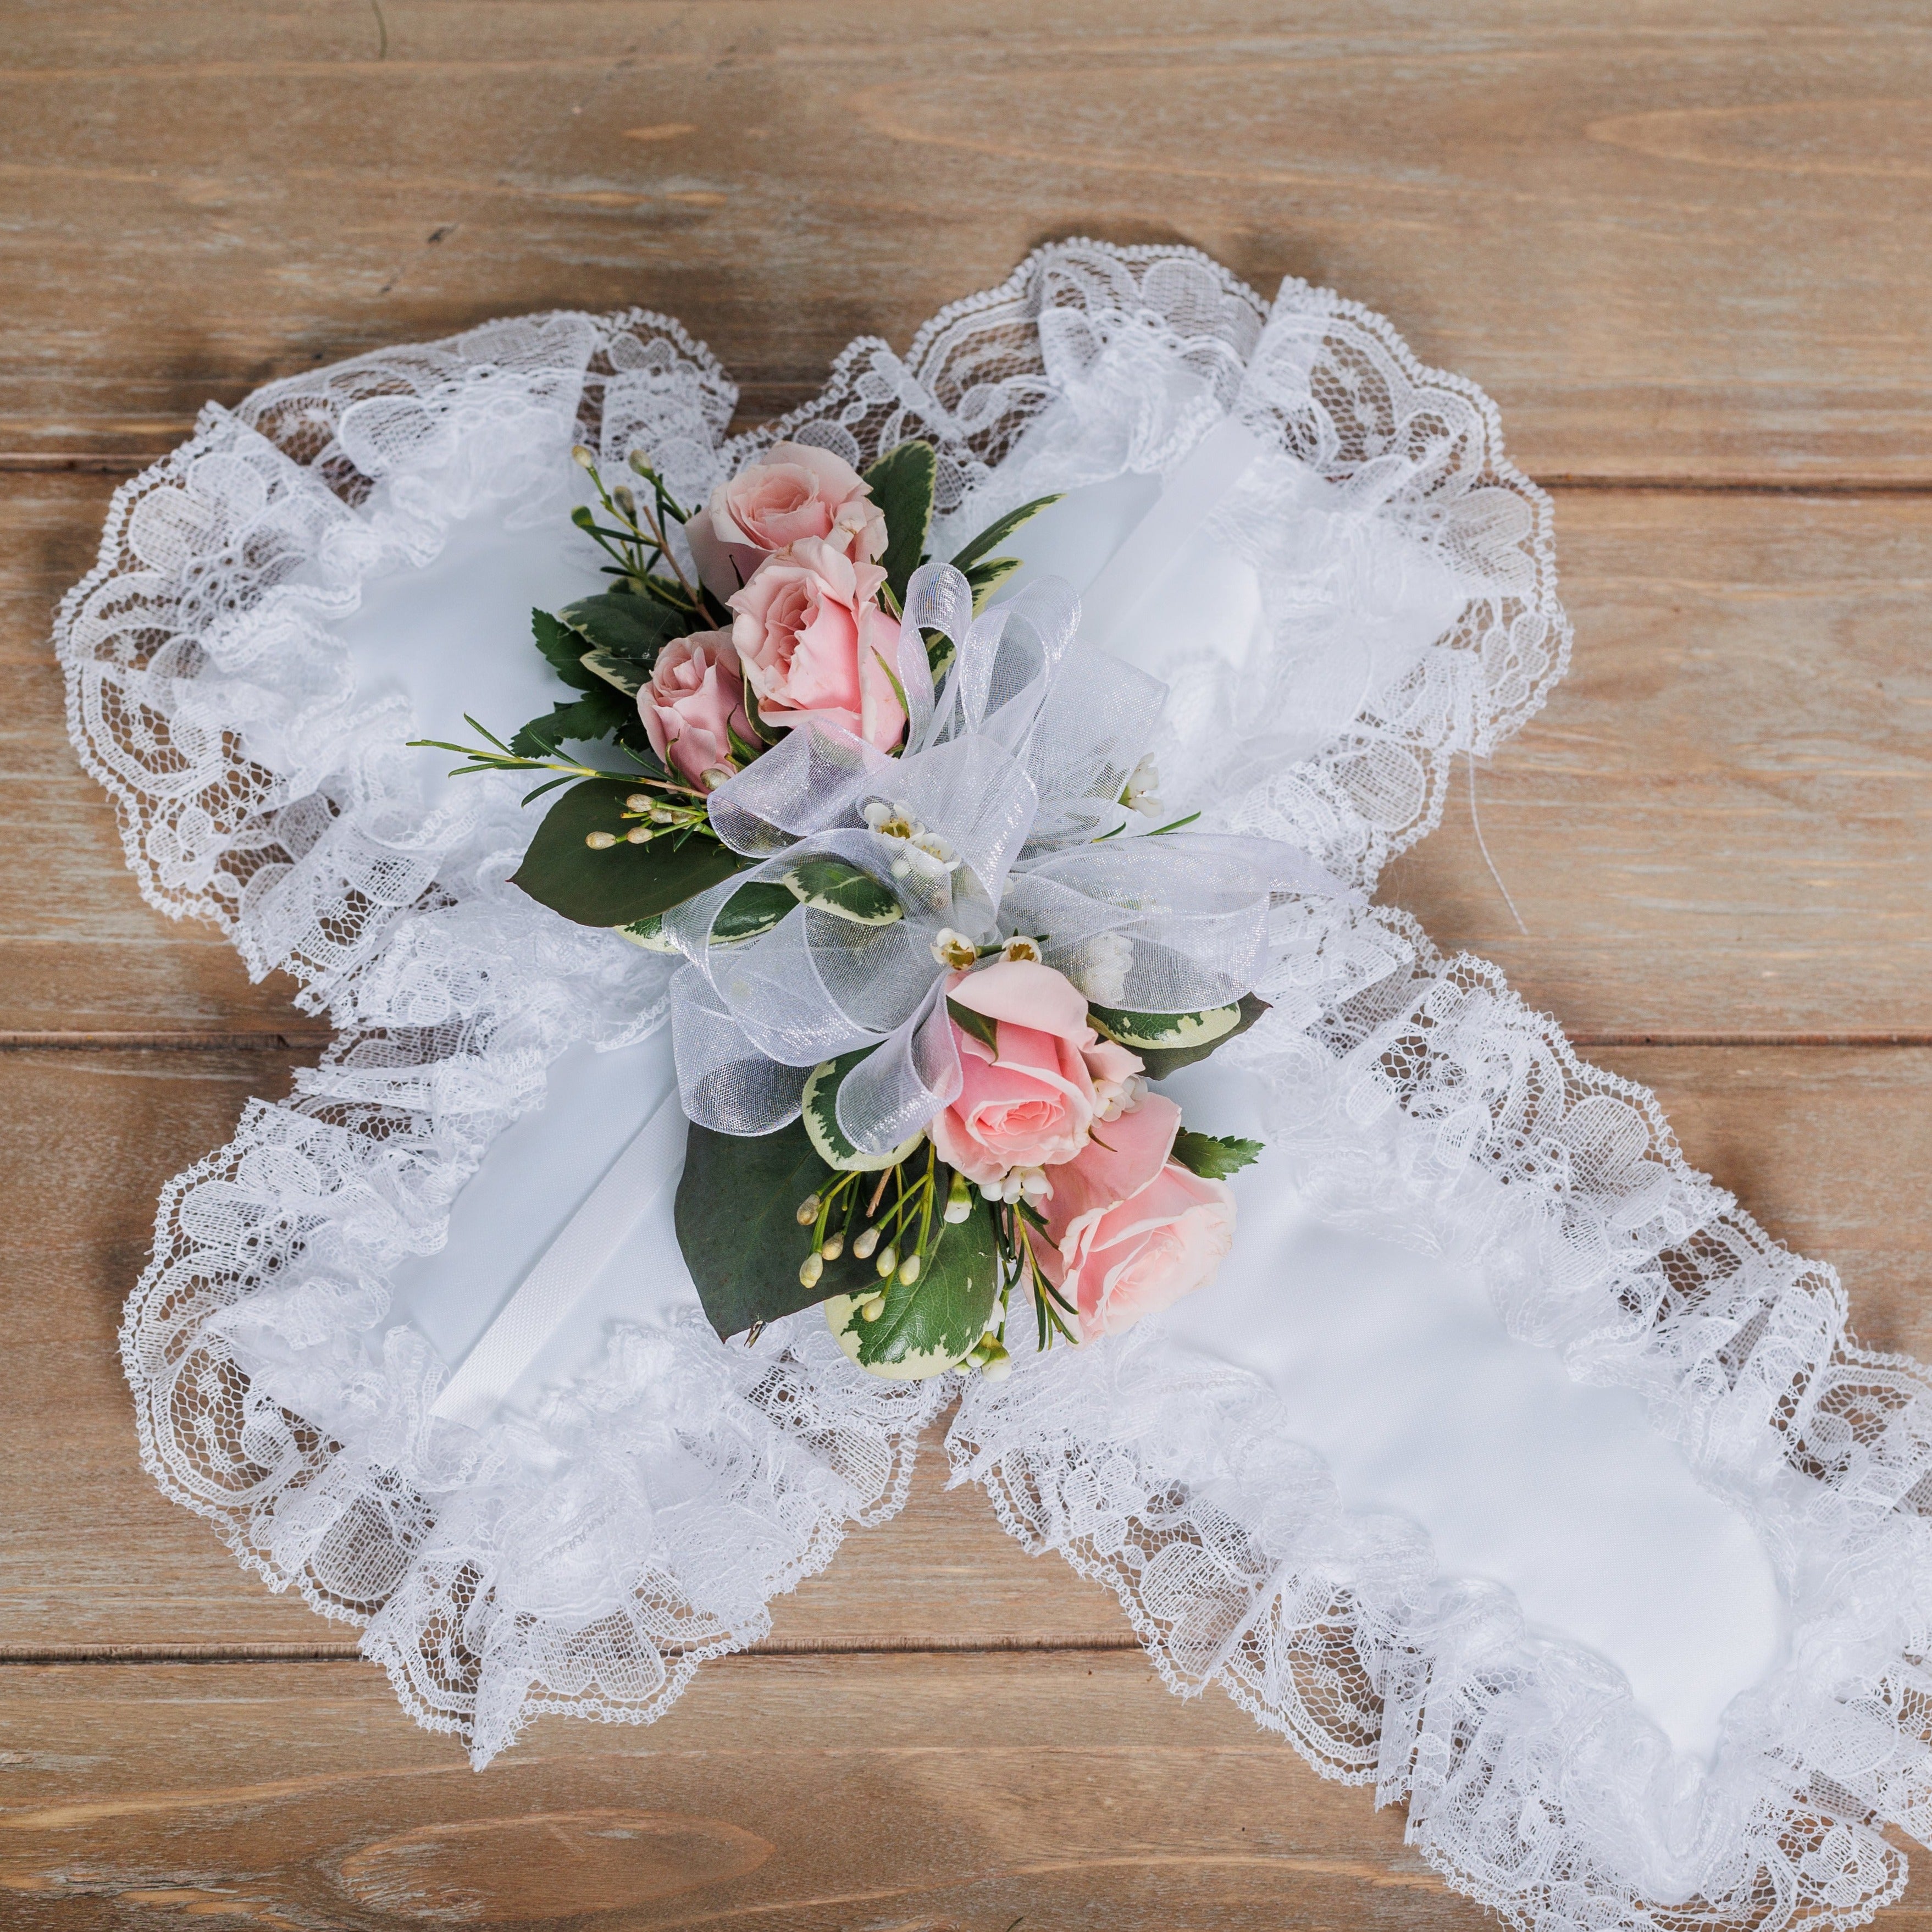 A white satin pillow with light pink spray roses and white sheer ribbon.